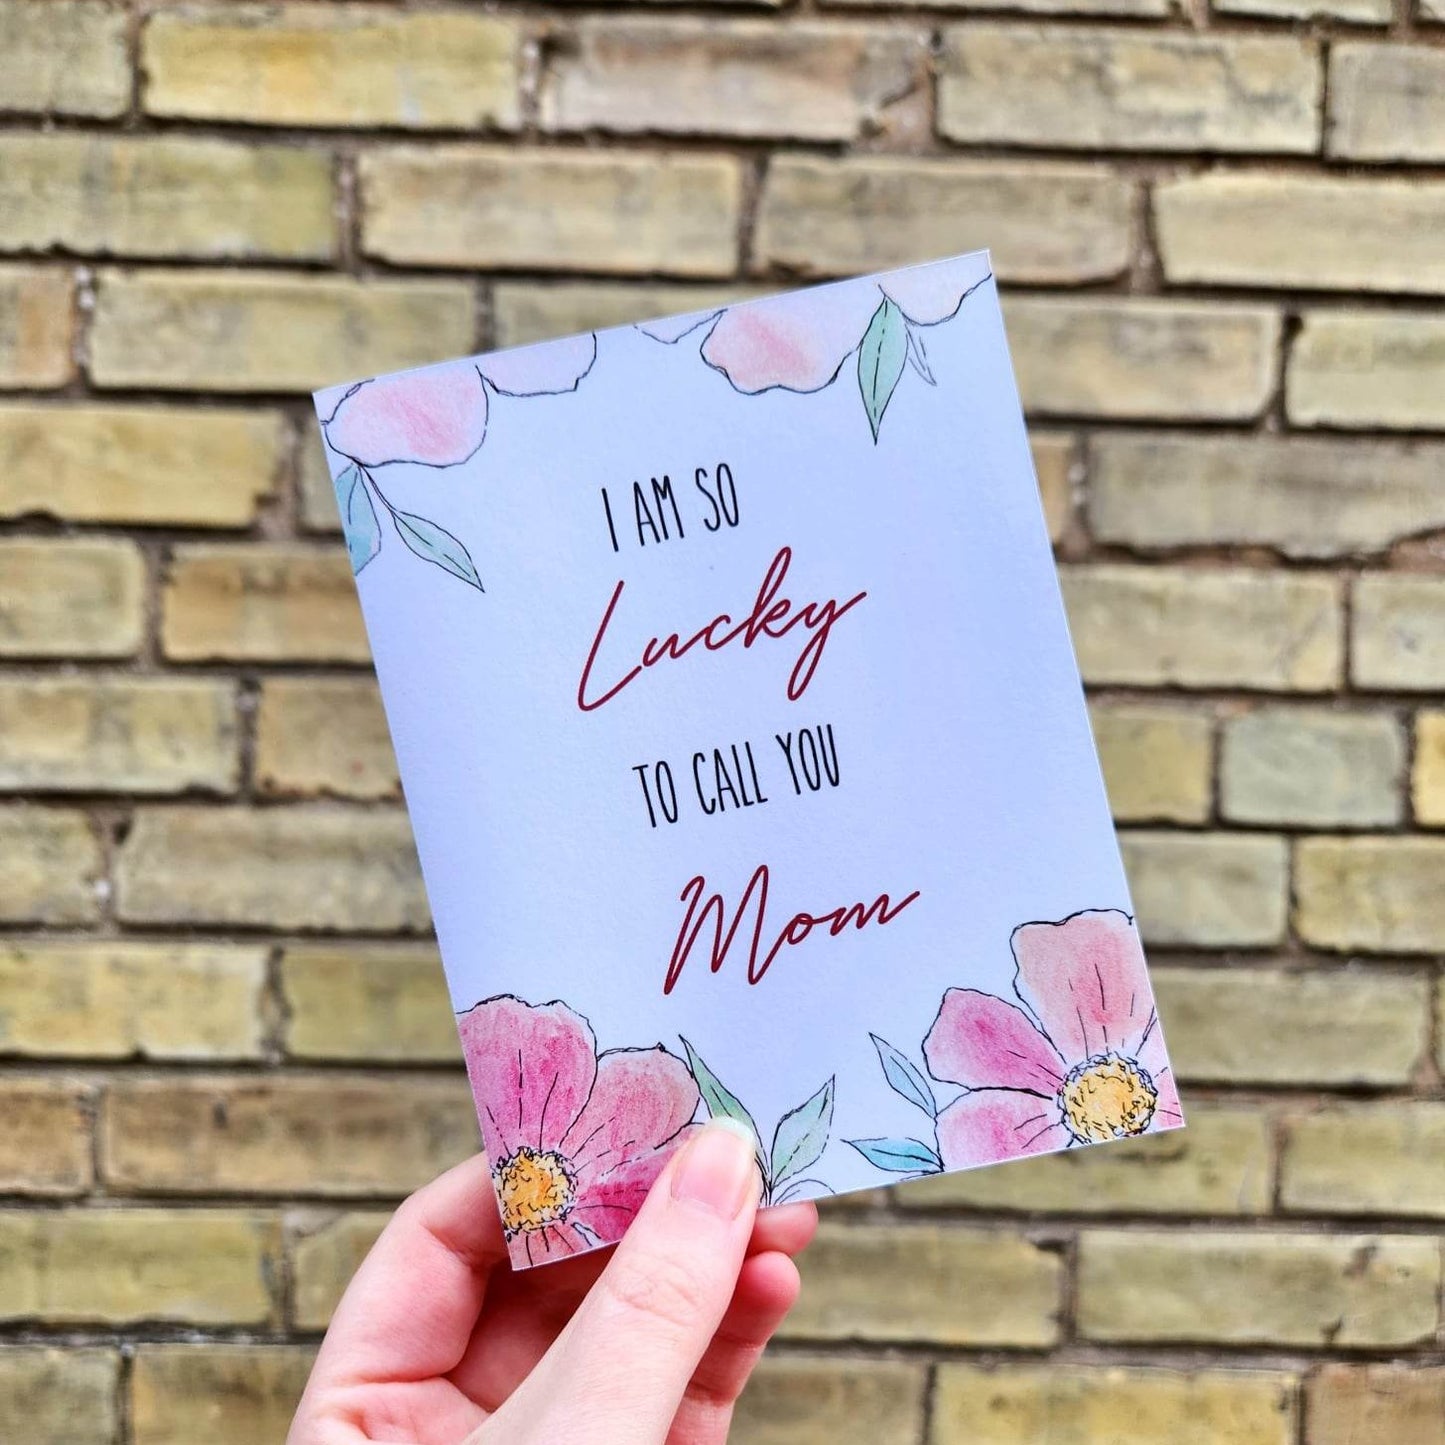 I am so lucky to call you mom, Mother's Day card, Gratitude card for mom, Lucky to have you, Grateful for you mom, Happy Mother's Day